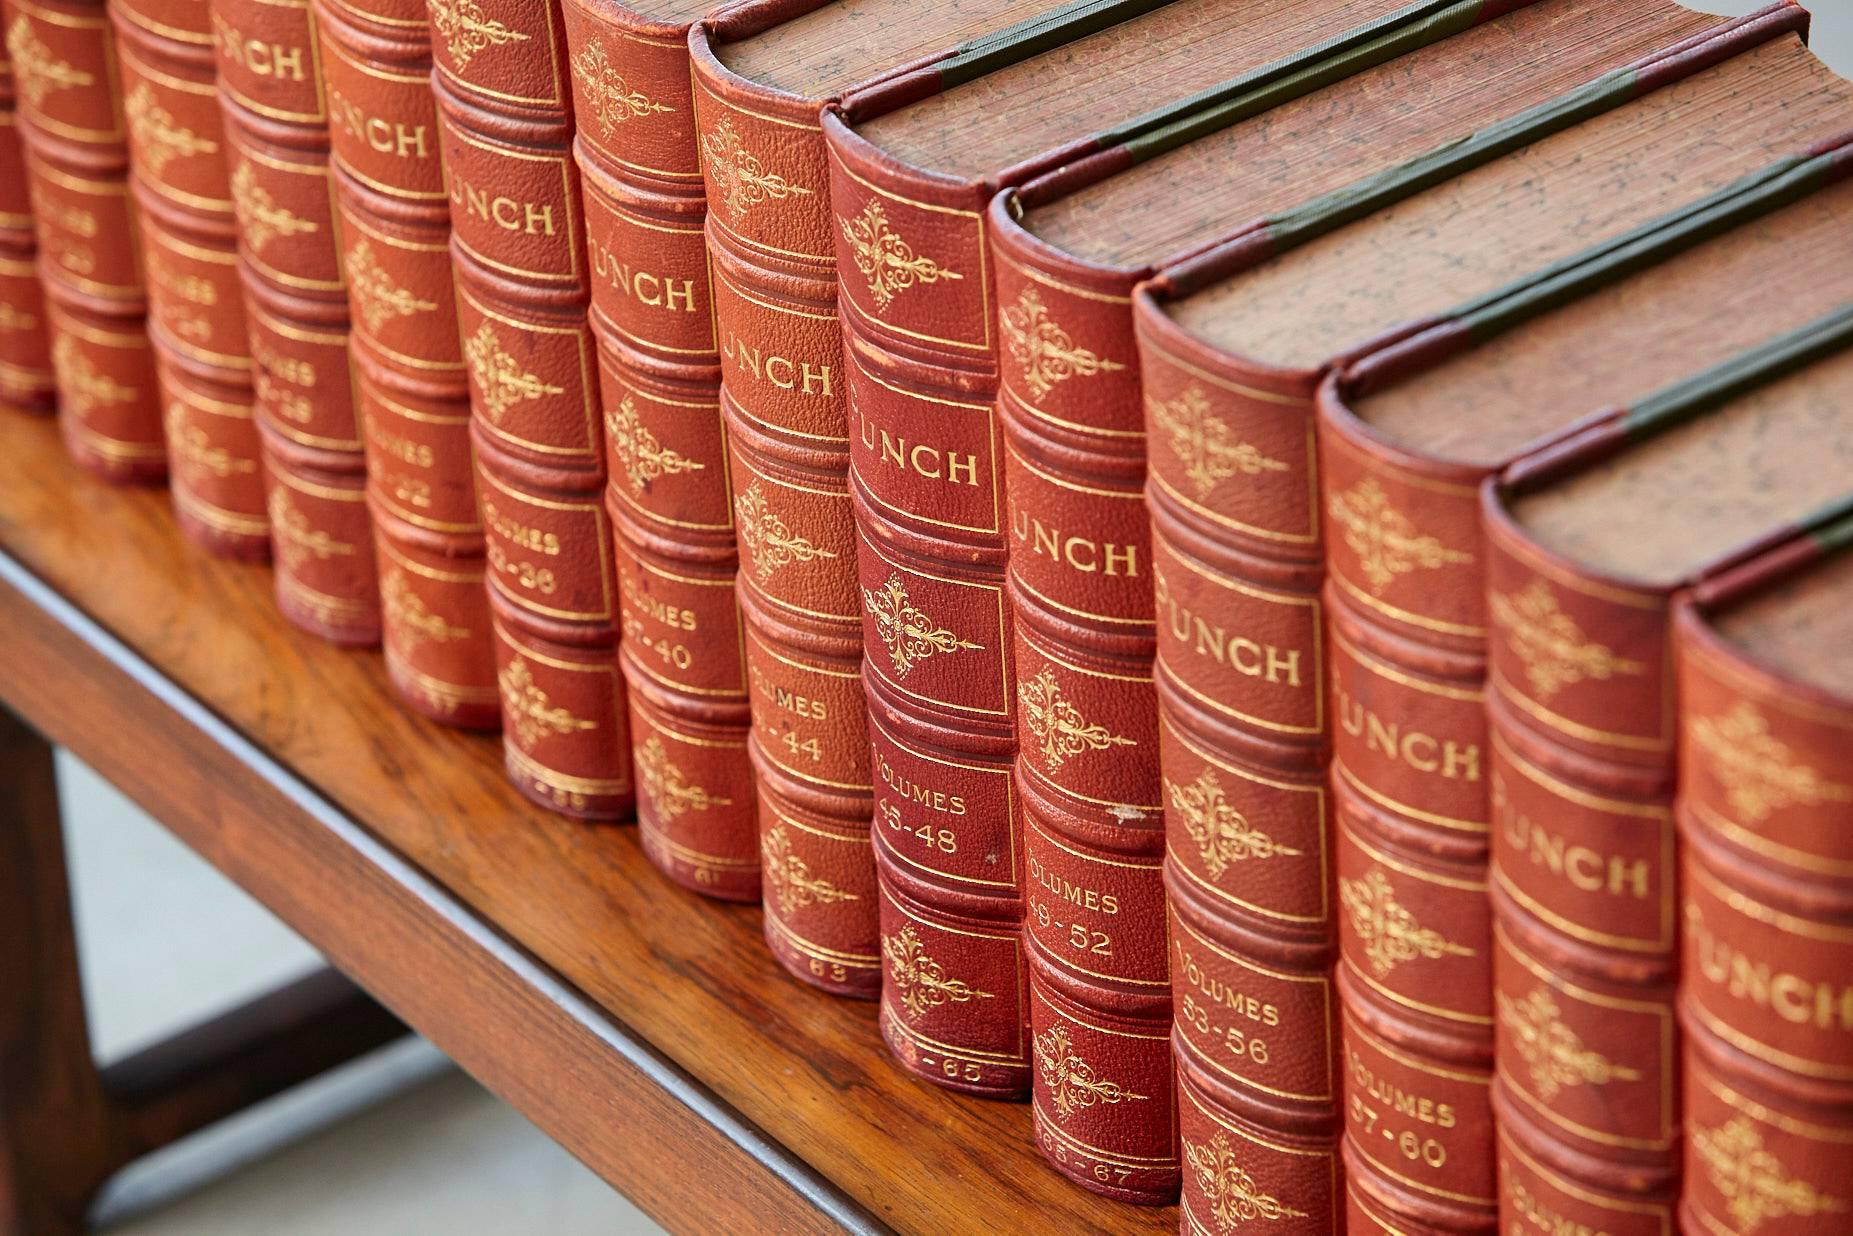 Pressed Set of 24 Leather Bound Volumes of Punch No 5-100 from the Estate of José Ferrer